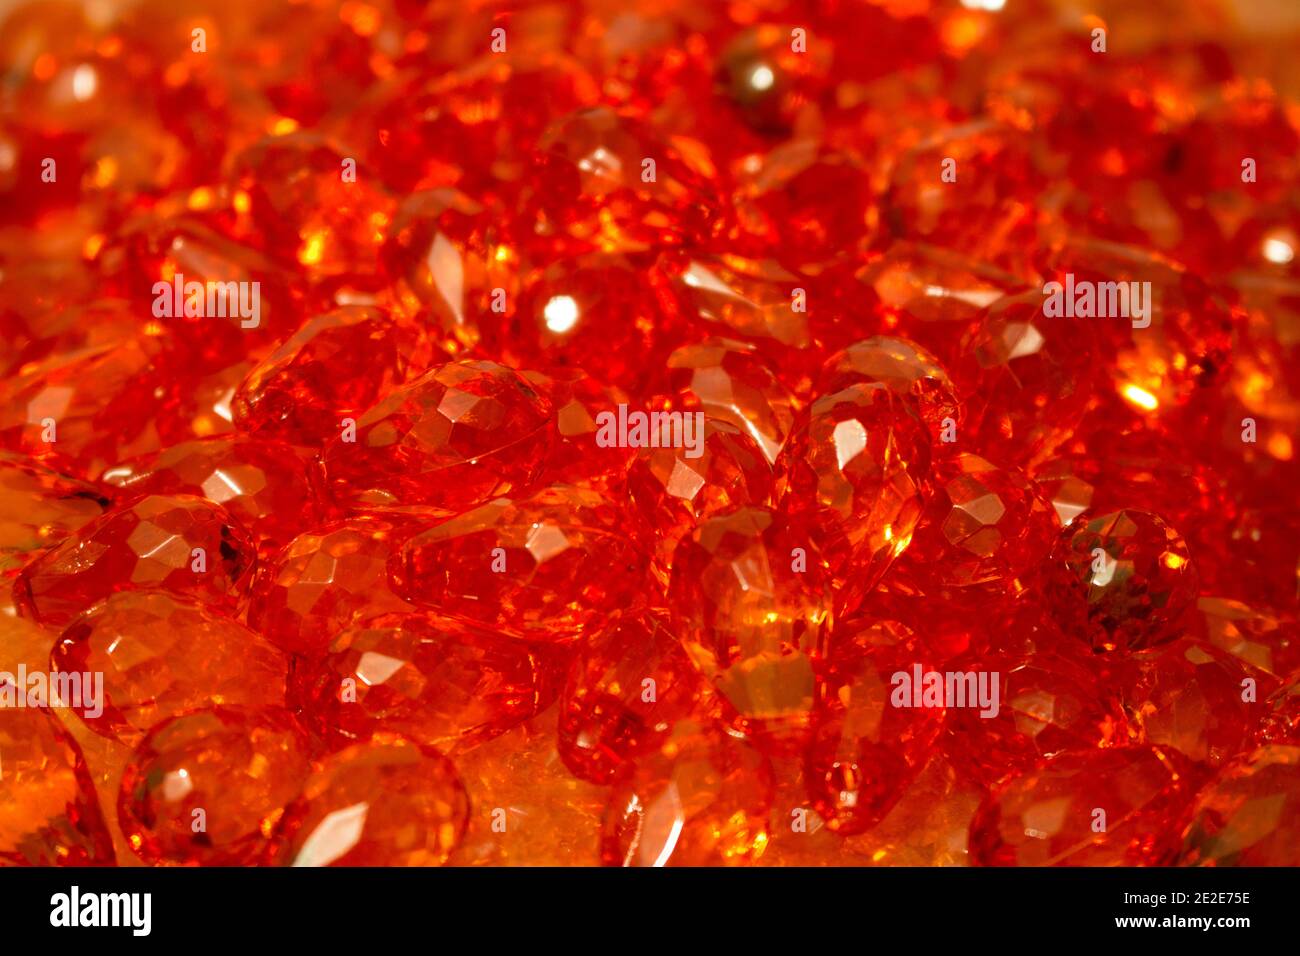 Group of orange glass beads together forming a texture Stock Photo